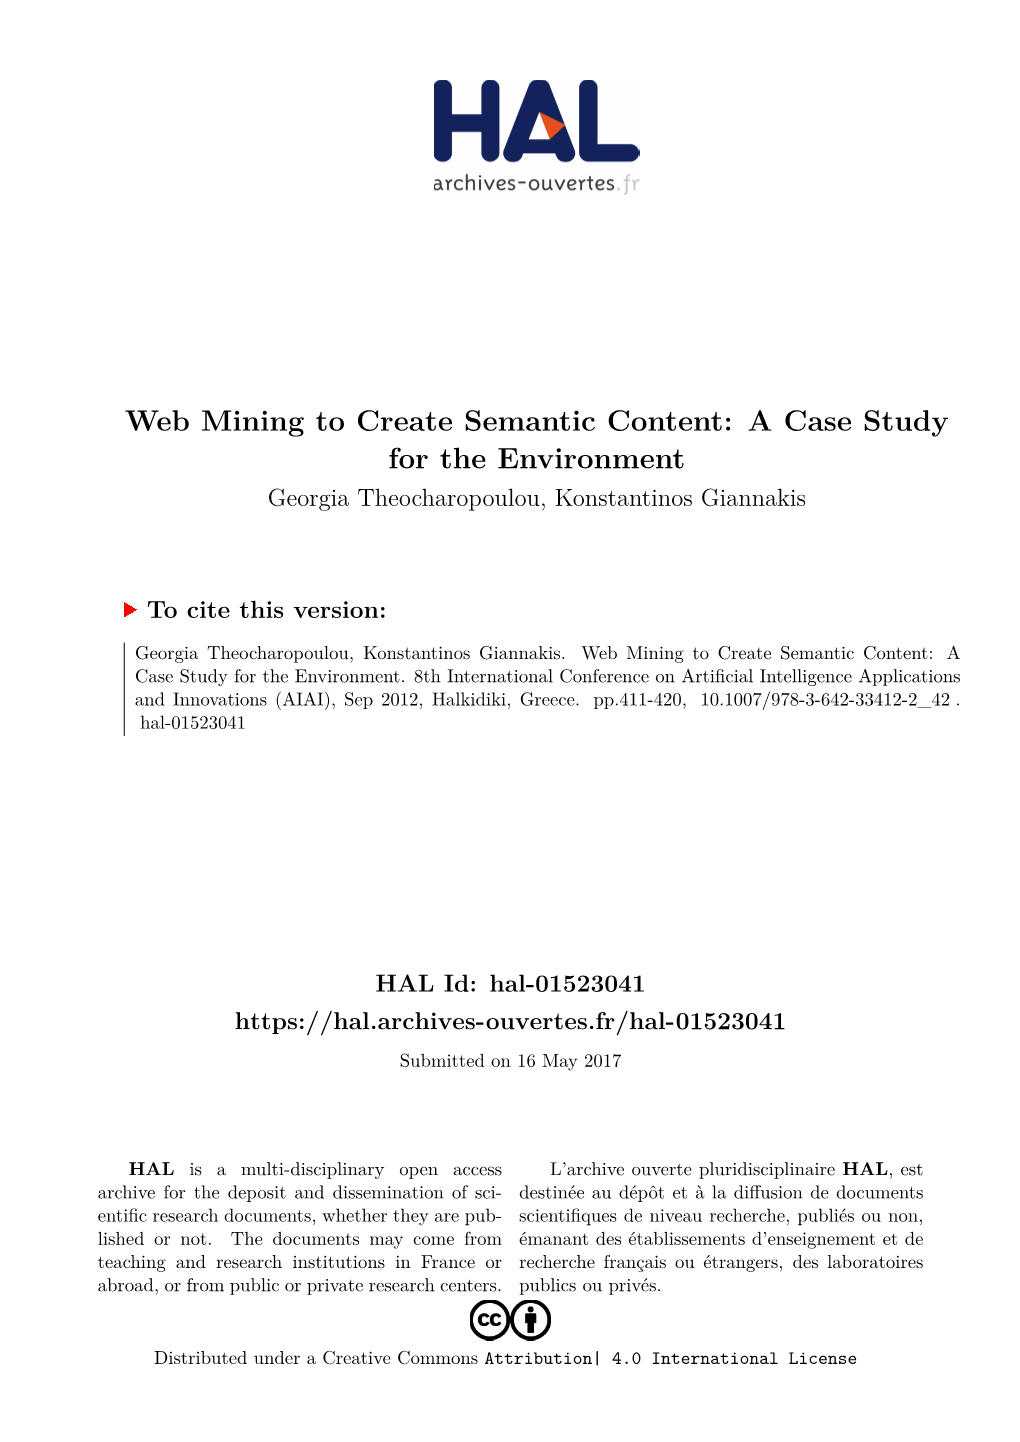 Web Mining to Create Semantic Content: a Case Study for the Environment Georgia Theocharopoulou, Konstantinos Giannakis